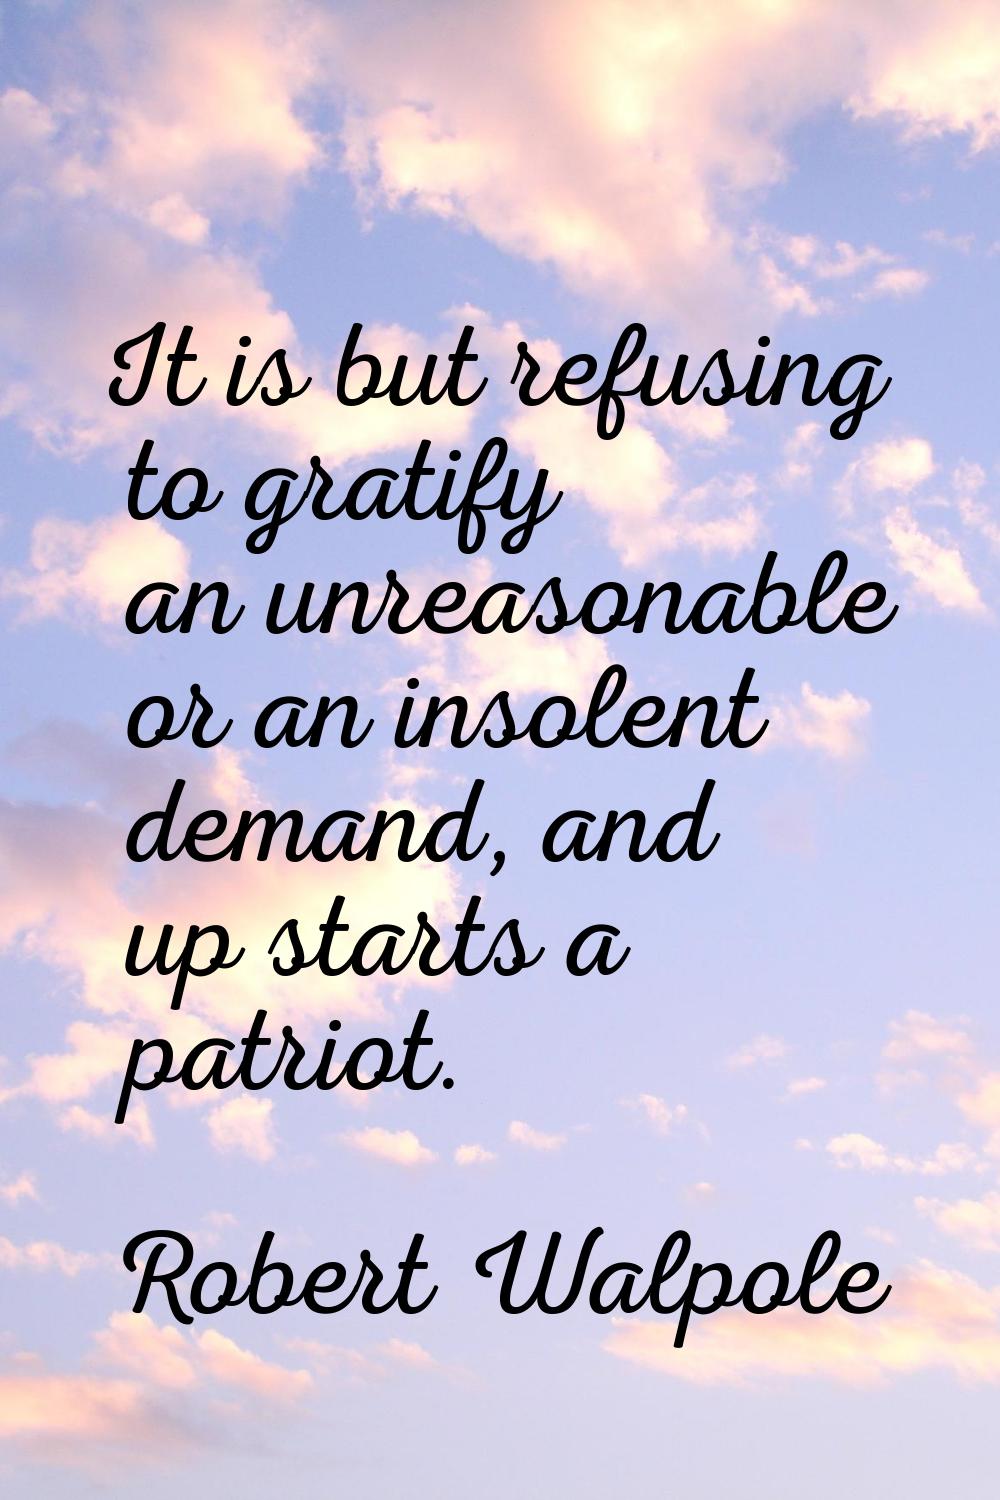 It is but refusing to gratify an unreasonable or an insolent demand, and up starts a patriot.